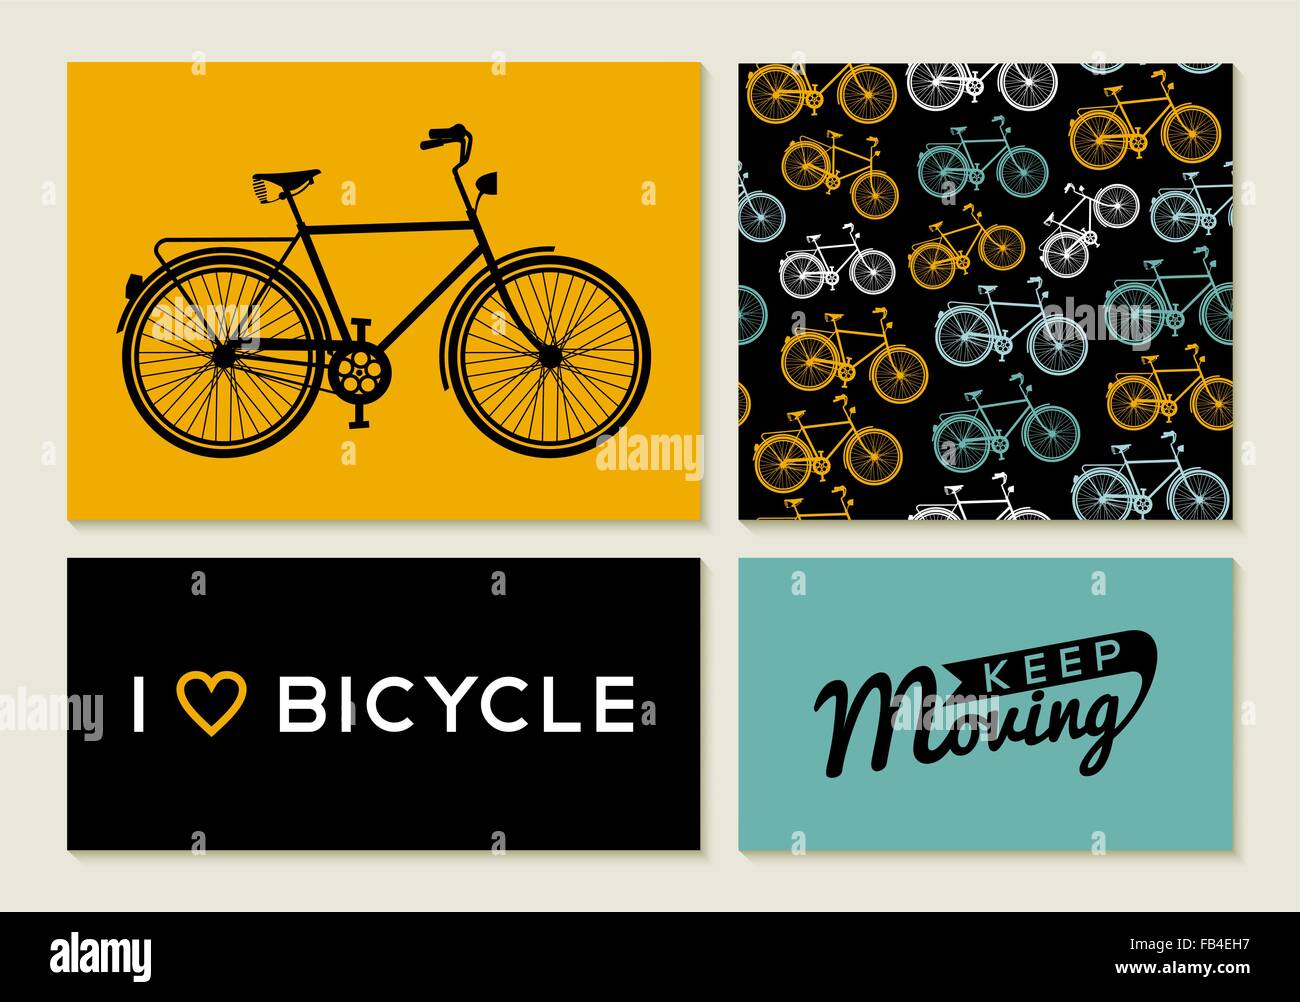 Bike concept set: retro seamless pattern, poster and label elements with bicycle outline silhouettes text quotes. EPS10 vector. Stock Vector